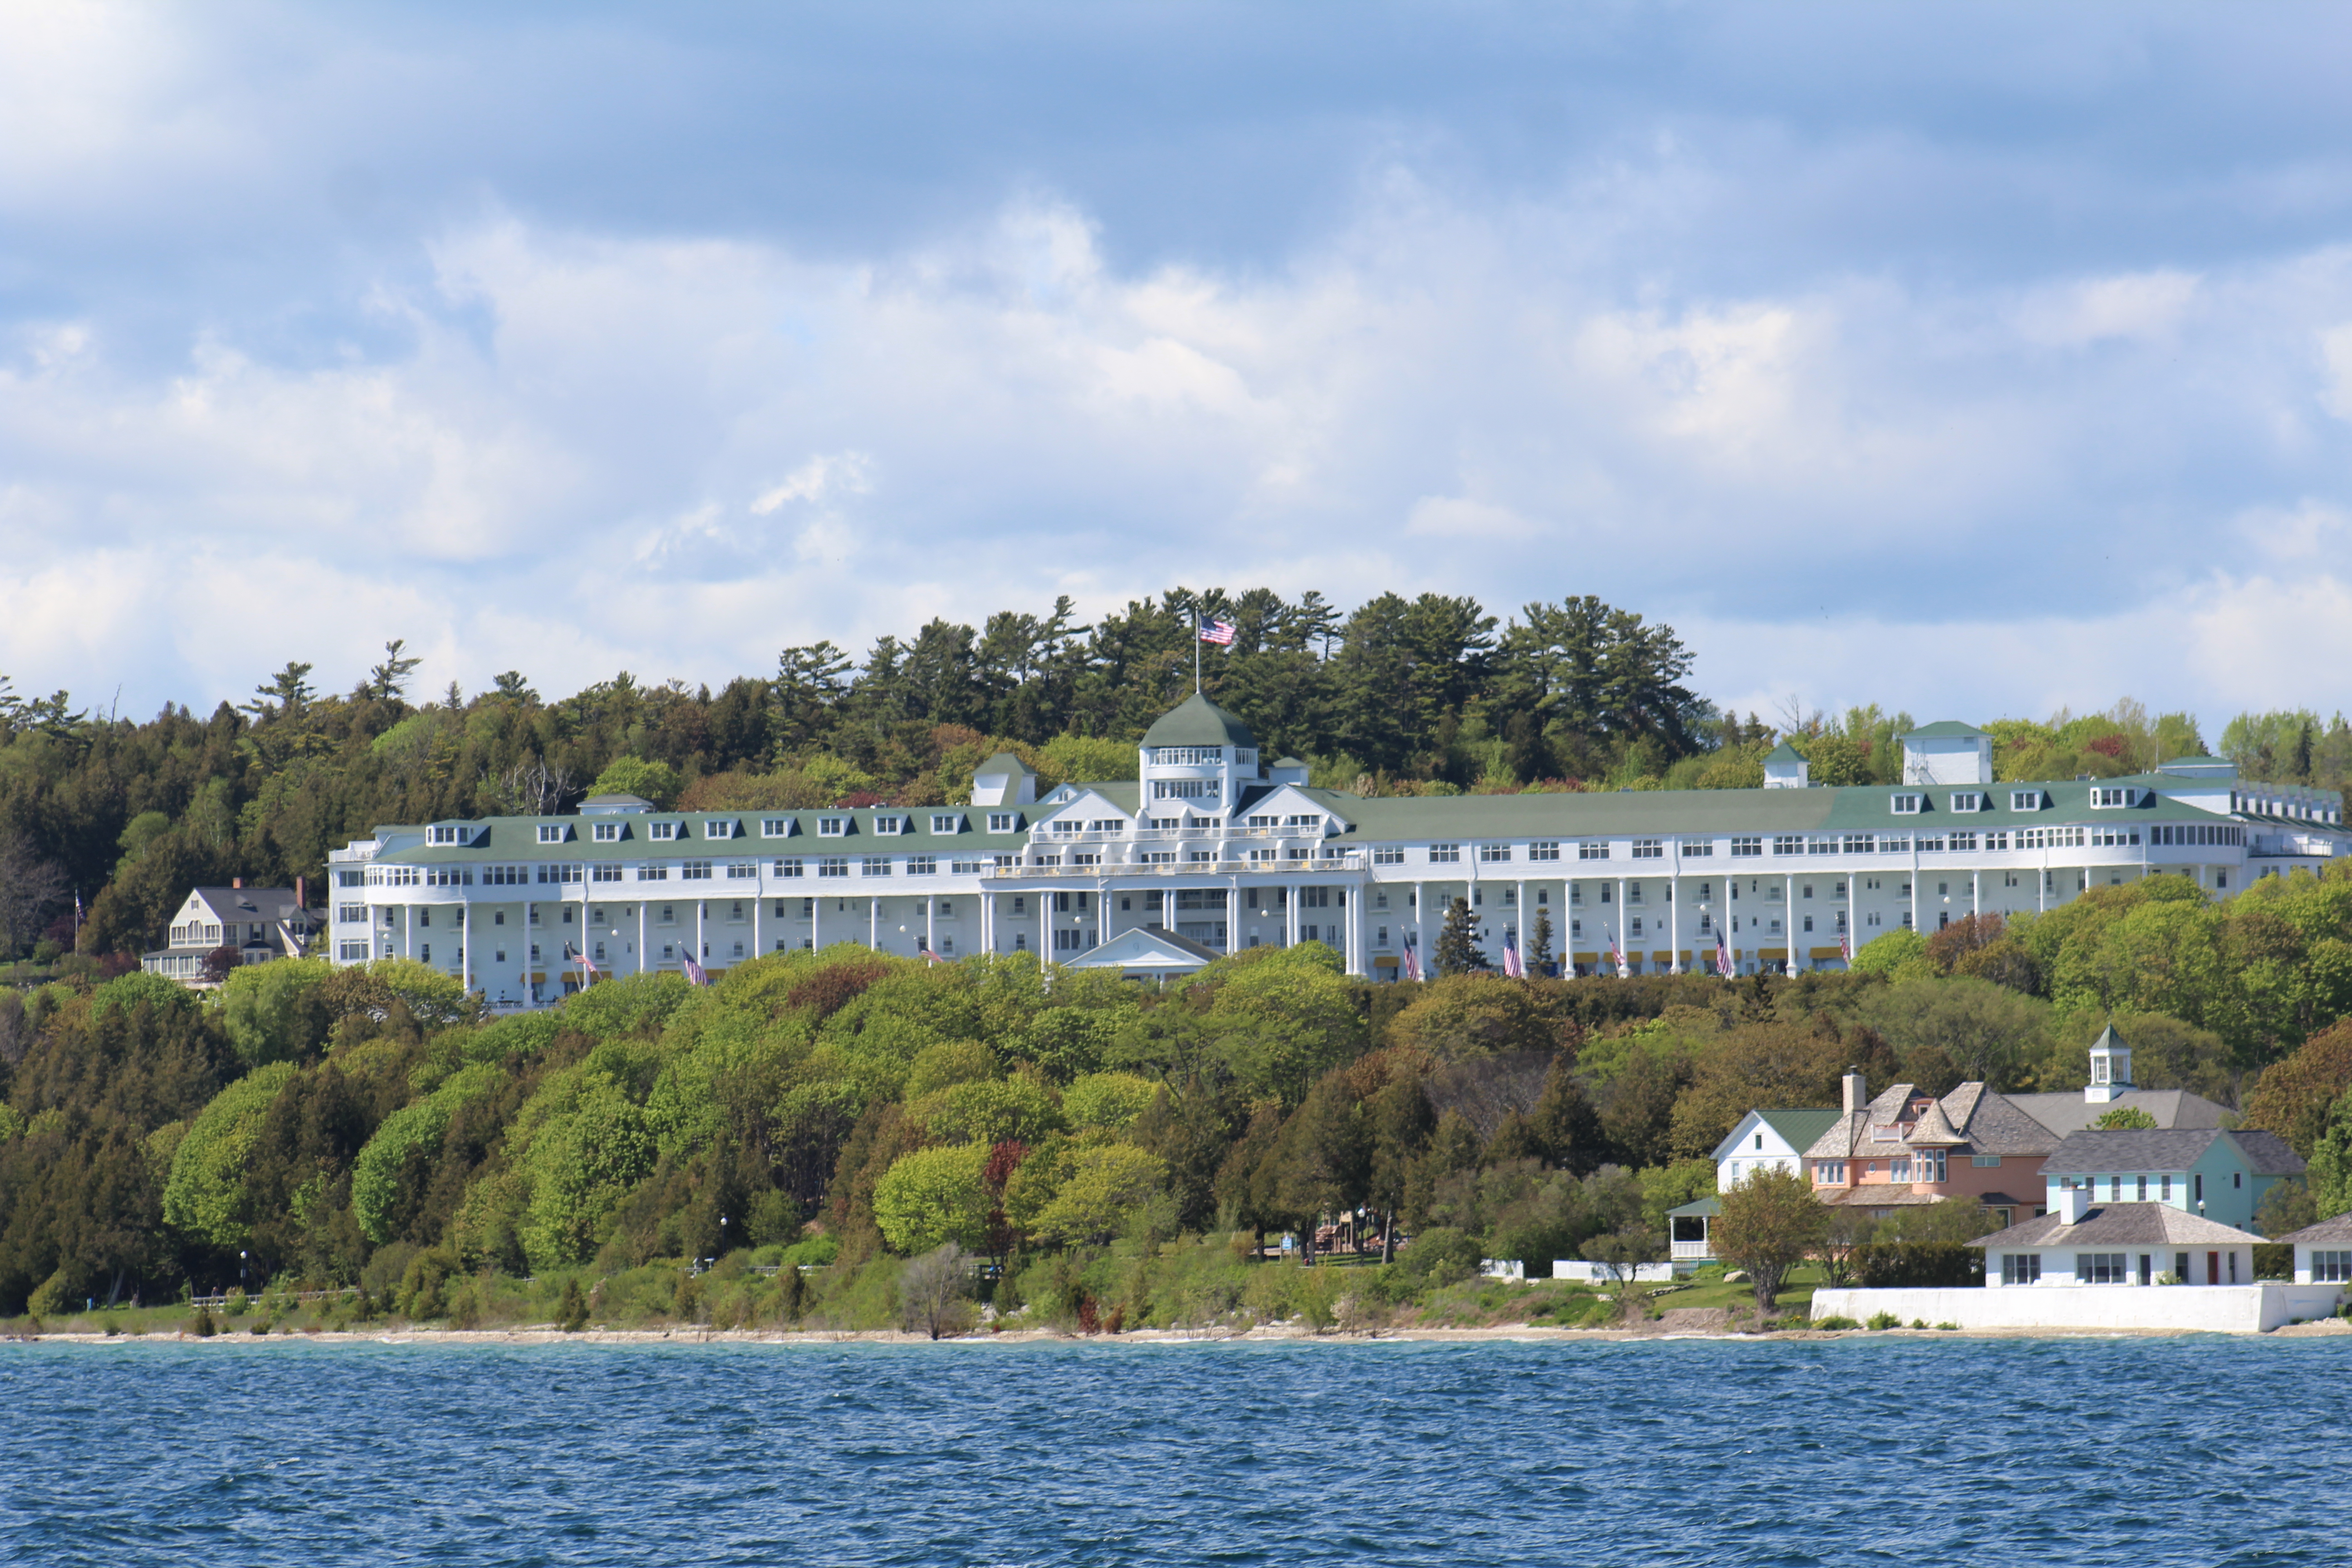 Preview the 2019 Mackinac Policy Conference WDET